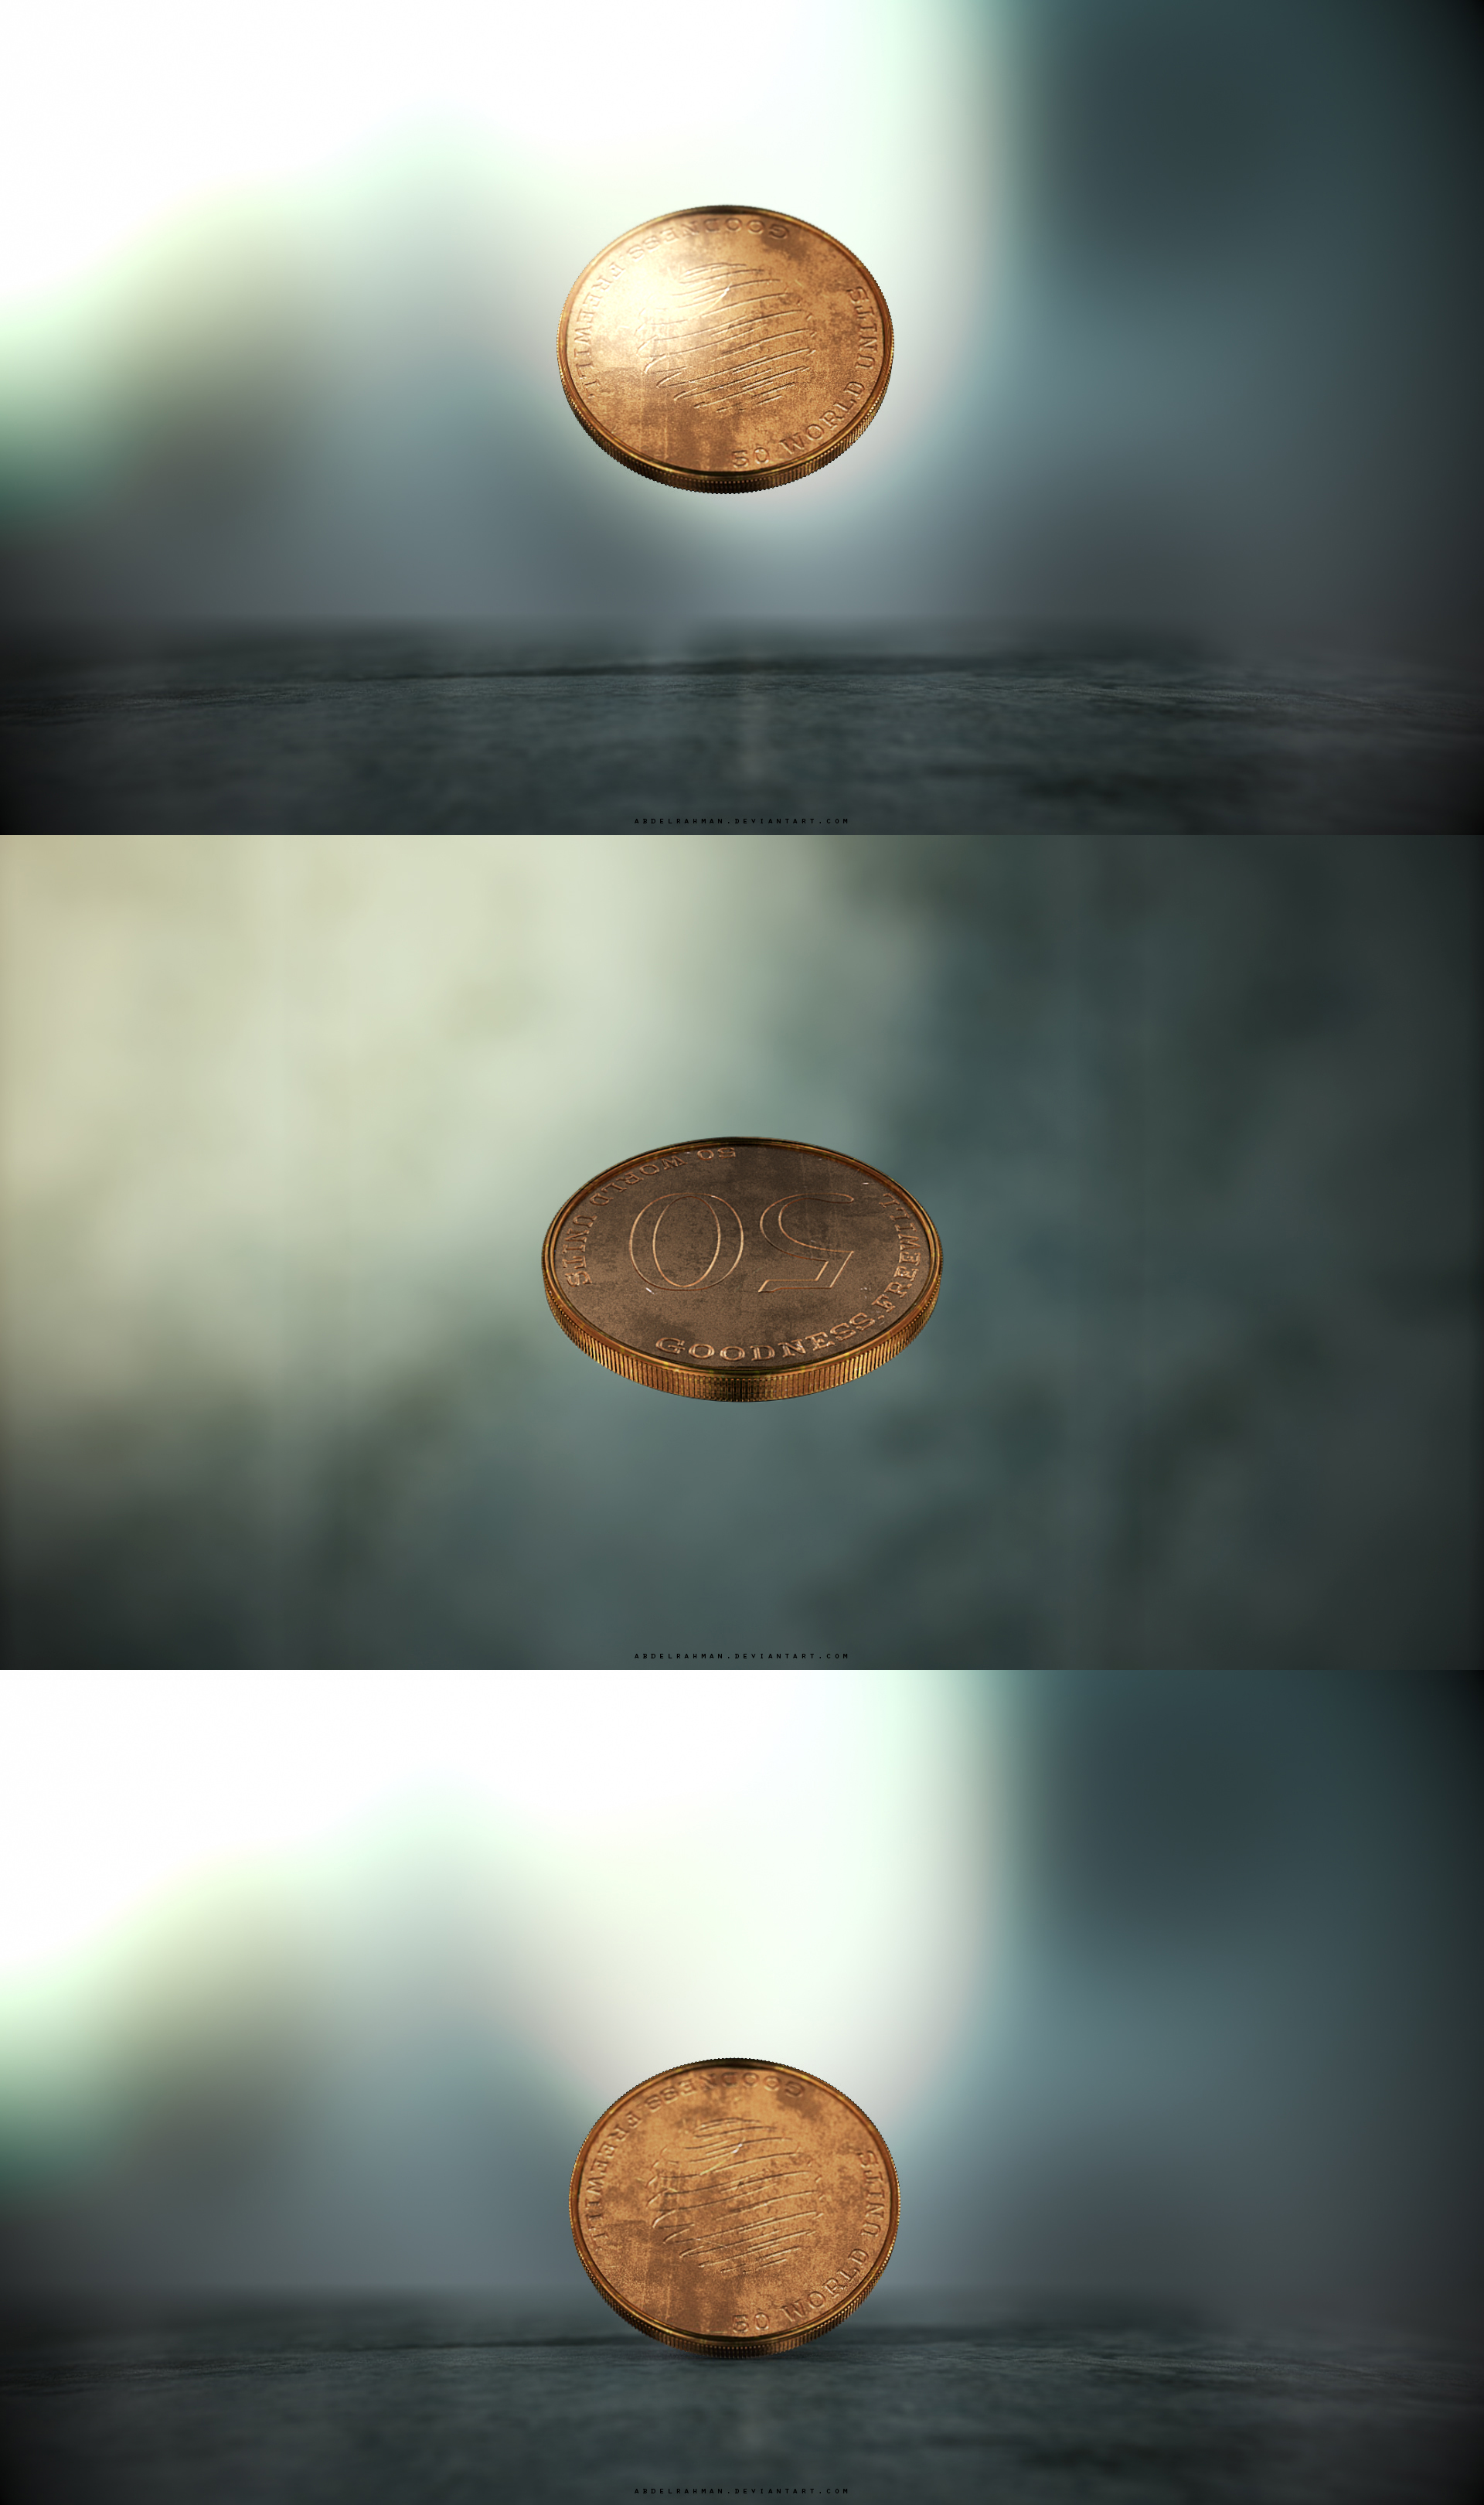 Coin Toss and Fall | Wallpaper Pack